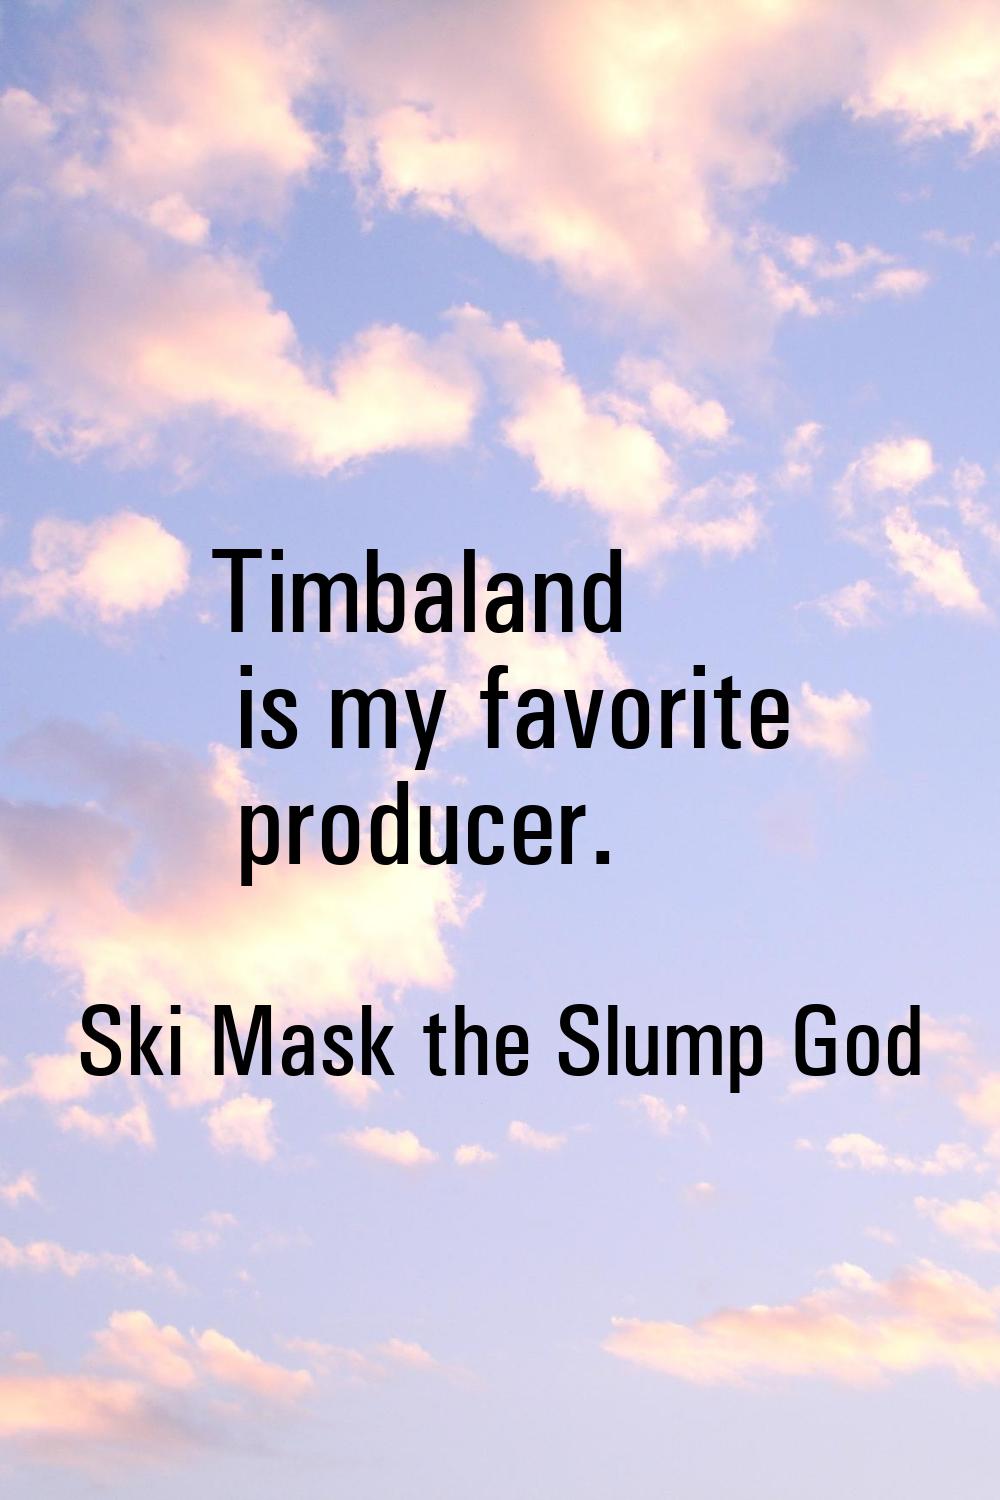 Timbaland is my favorite producer.